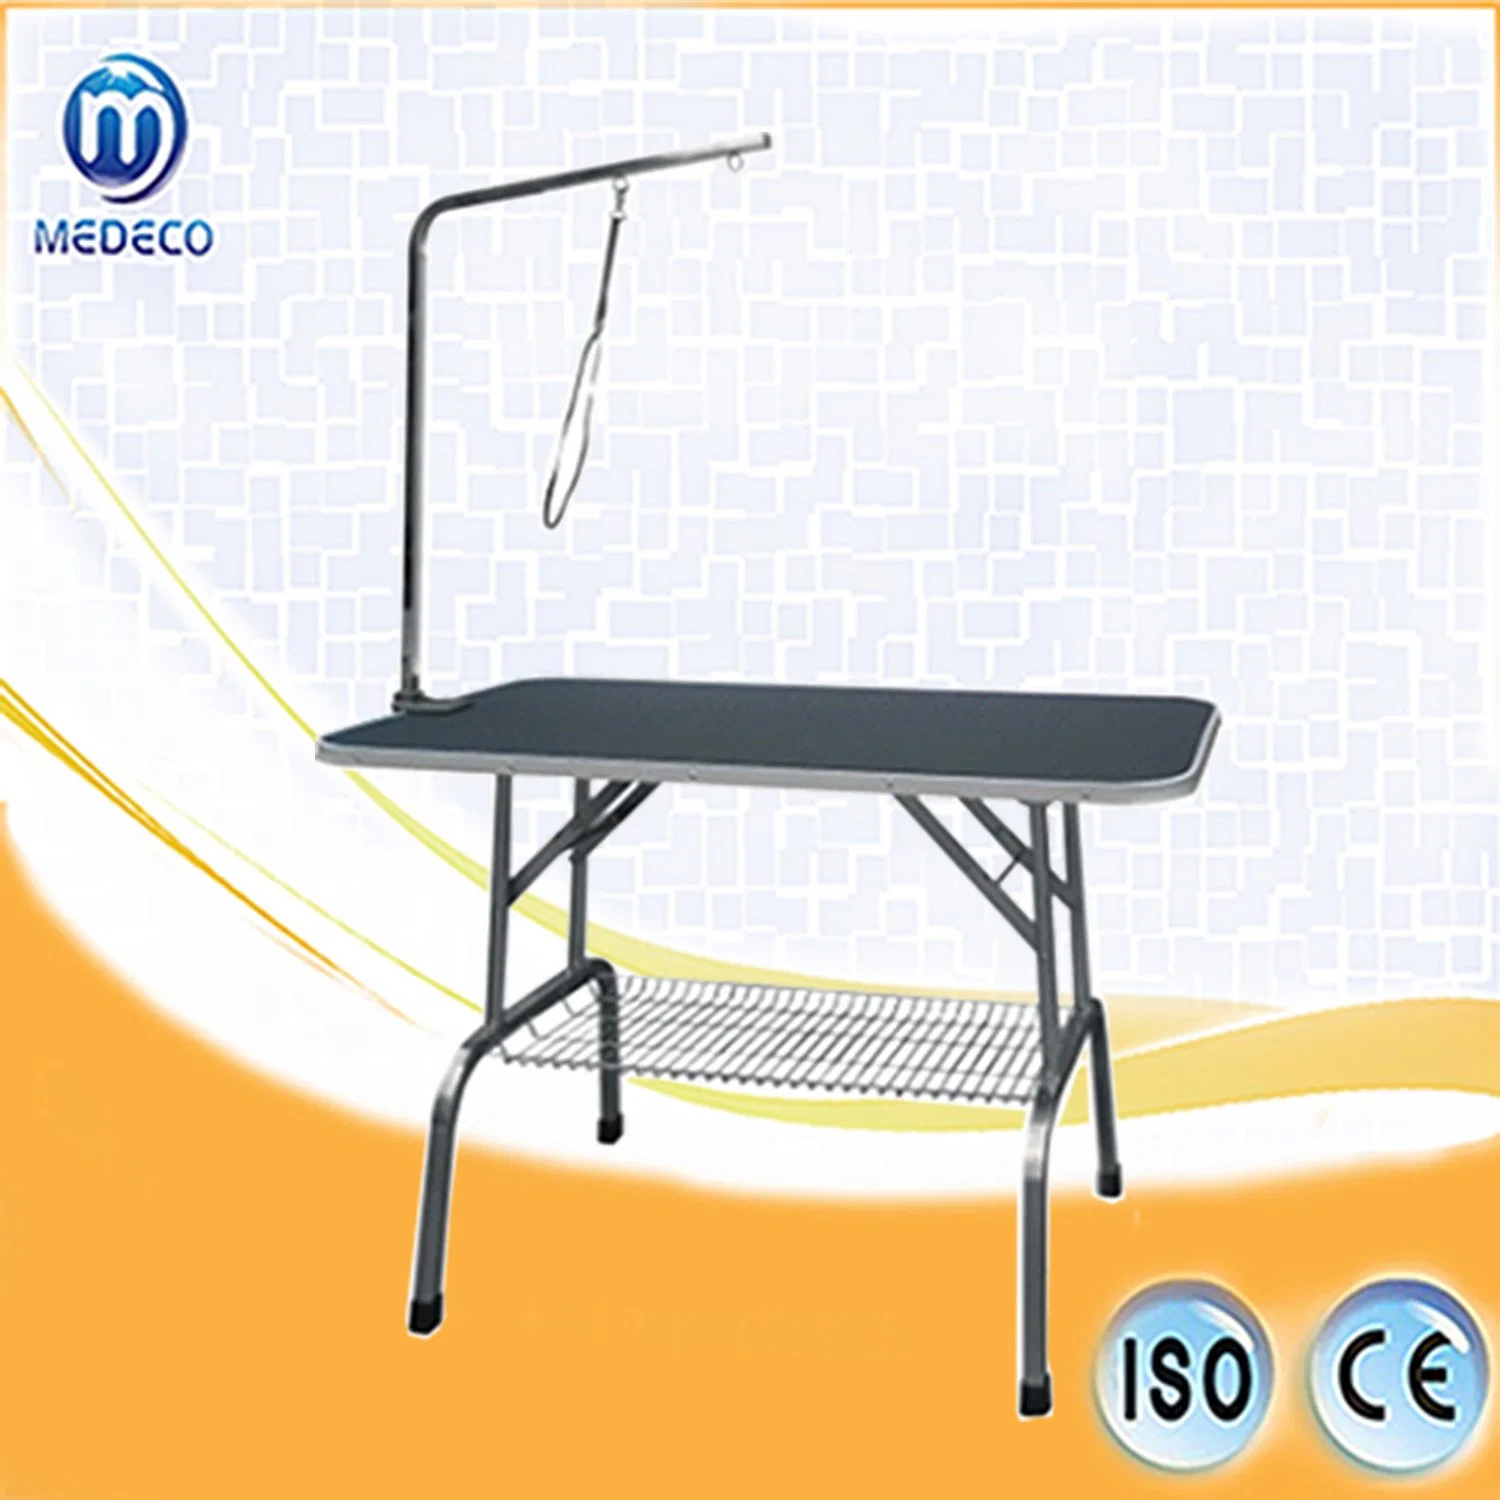 Pet Grooming Table (square hydraulic lift pet grooming table) Mef08009